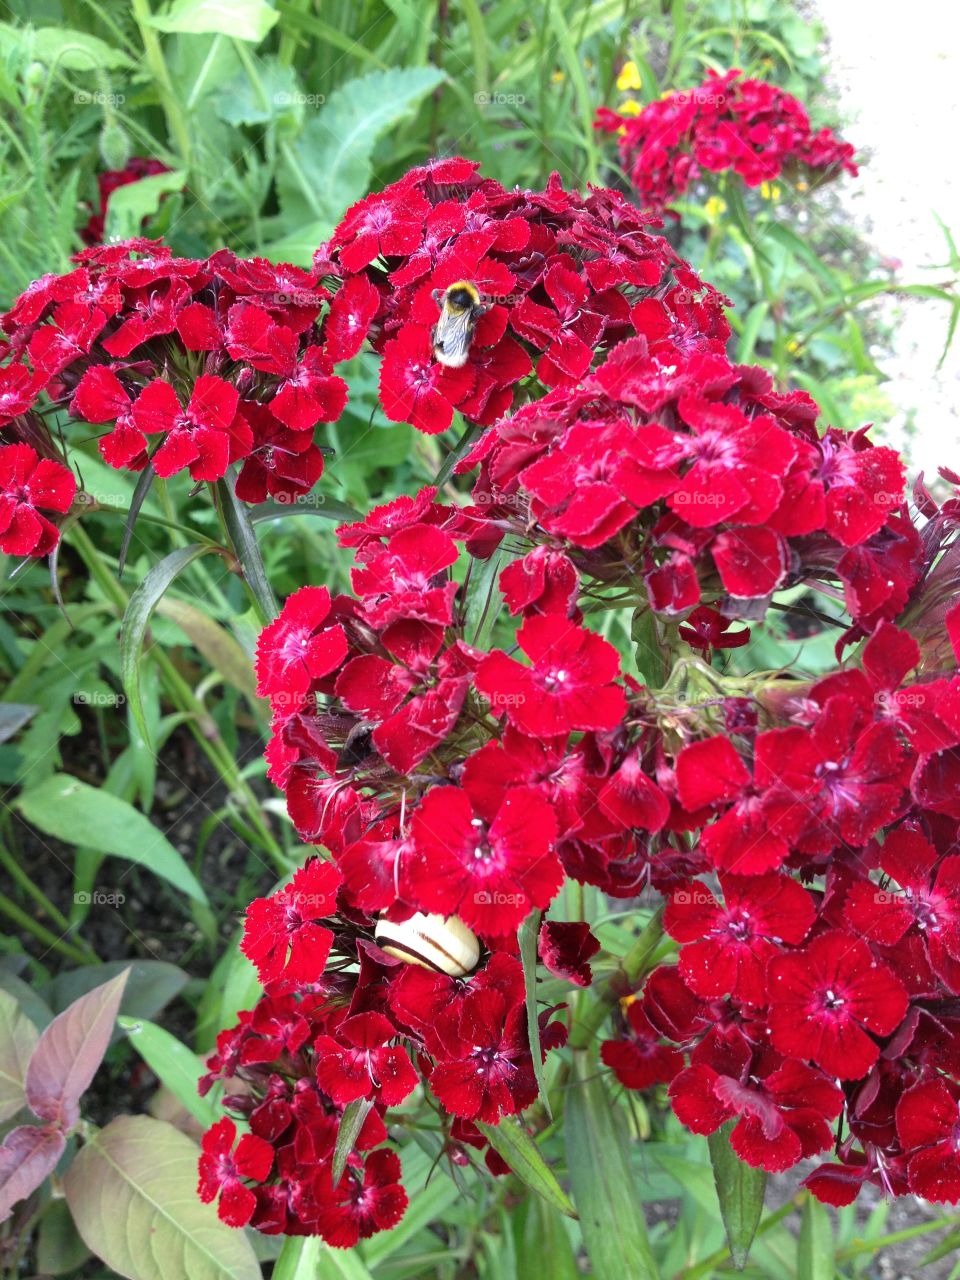 Red Flowers 